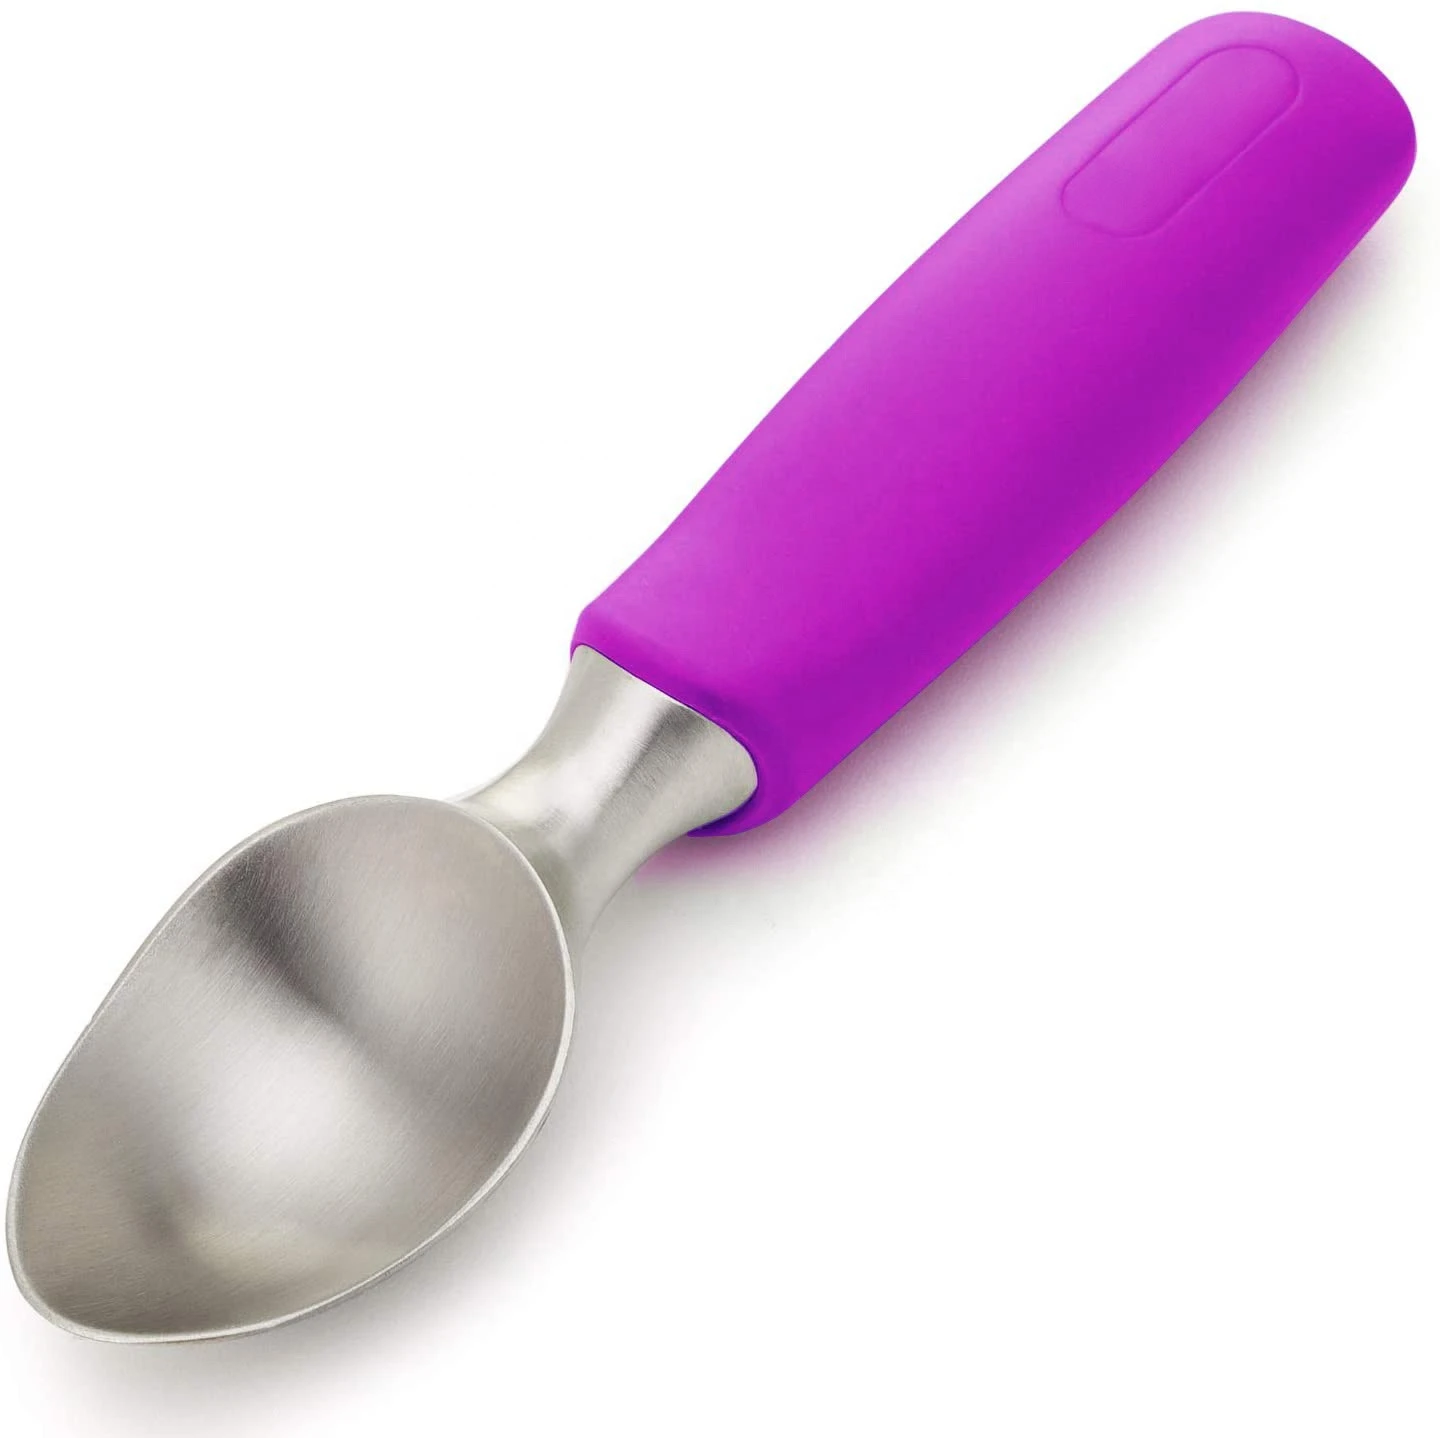 Heavy Duty Stainless Steel Ice Cream Scoop With Non-Slip Rubber Grip